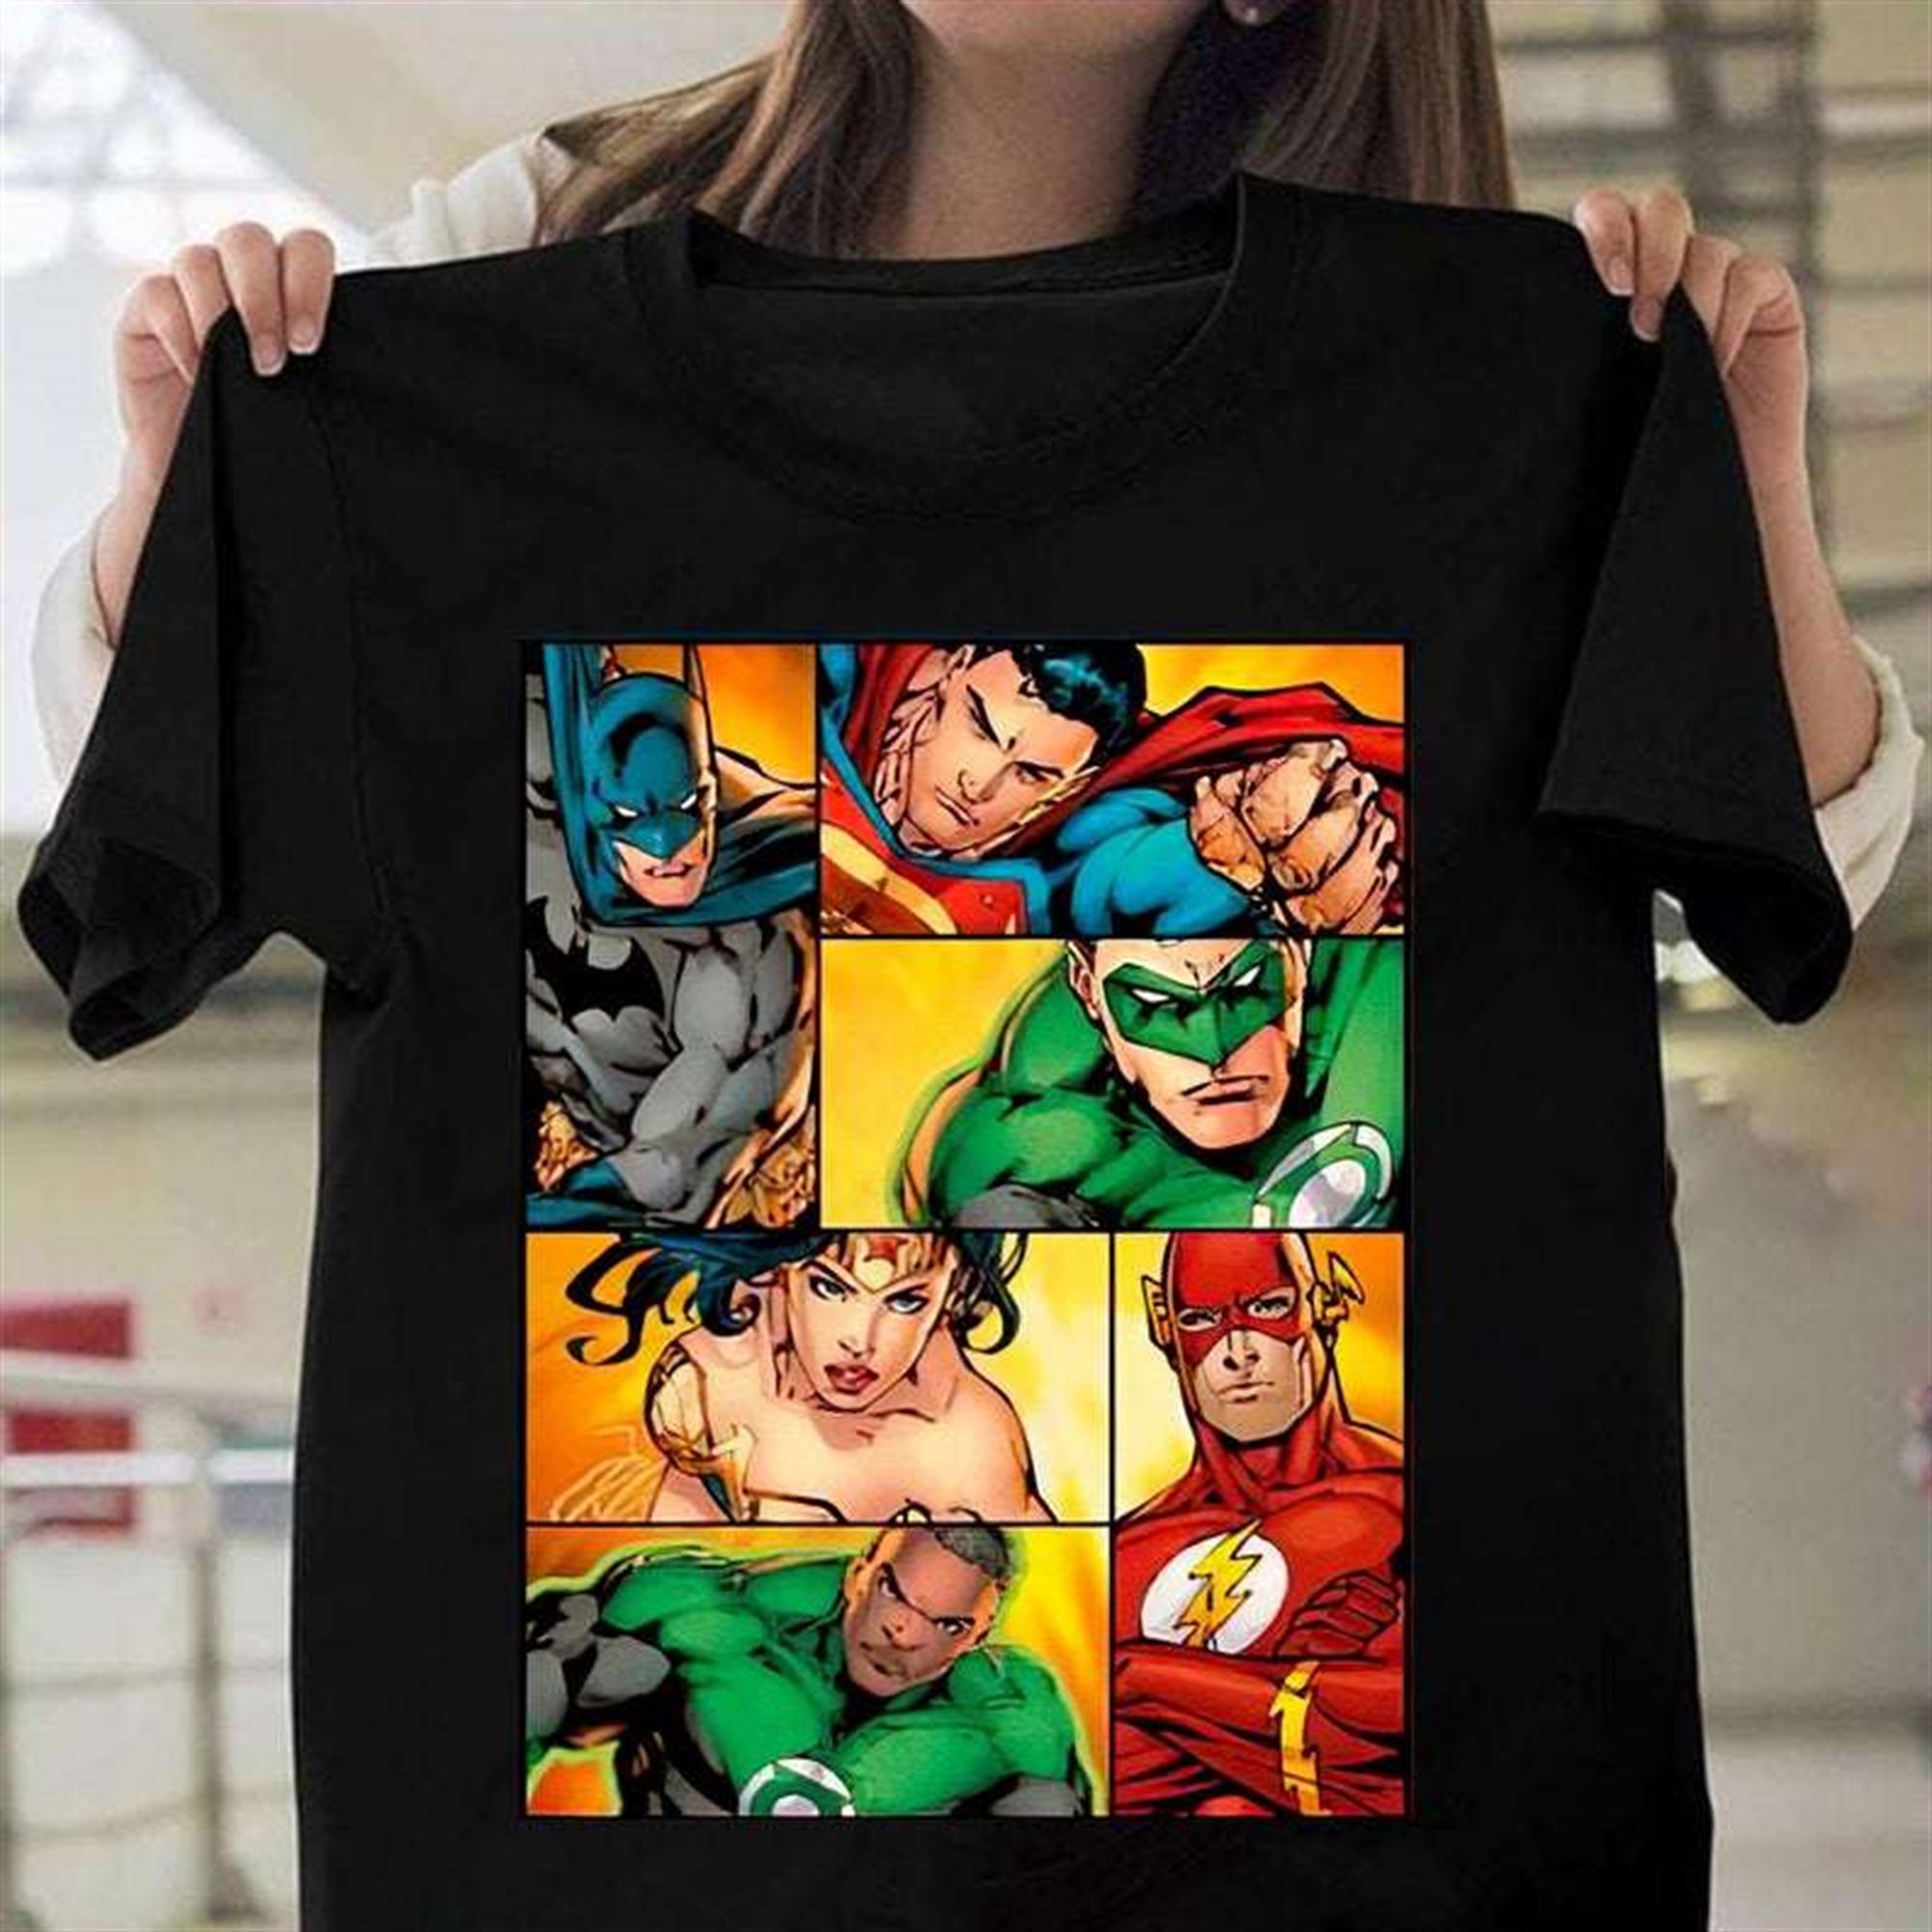 Justice League Dc Comics Unisex T Shirt Full Size Up To 5xl